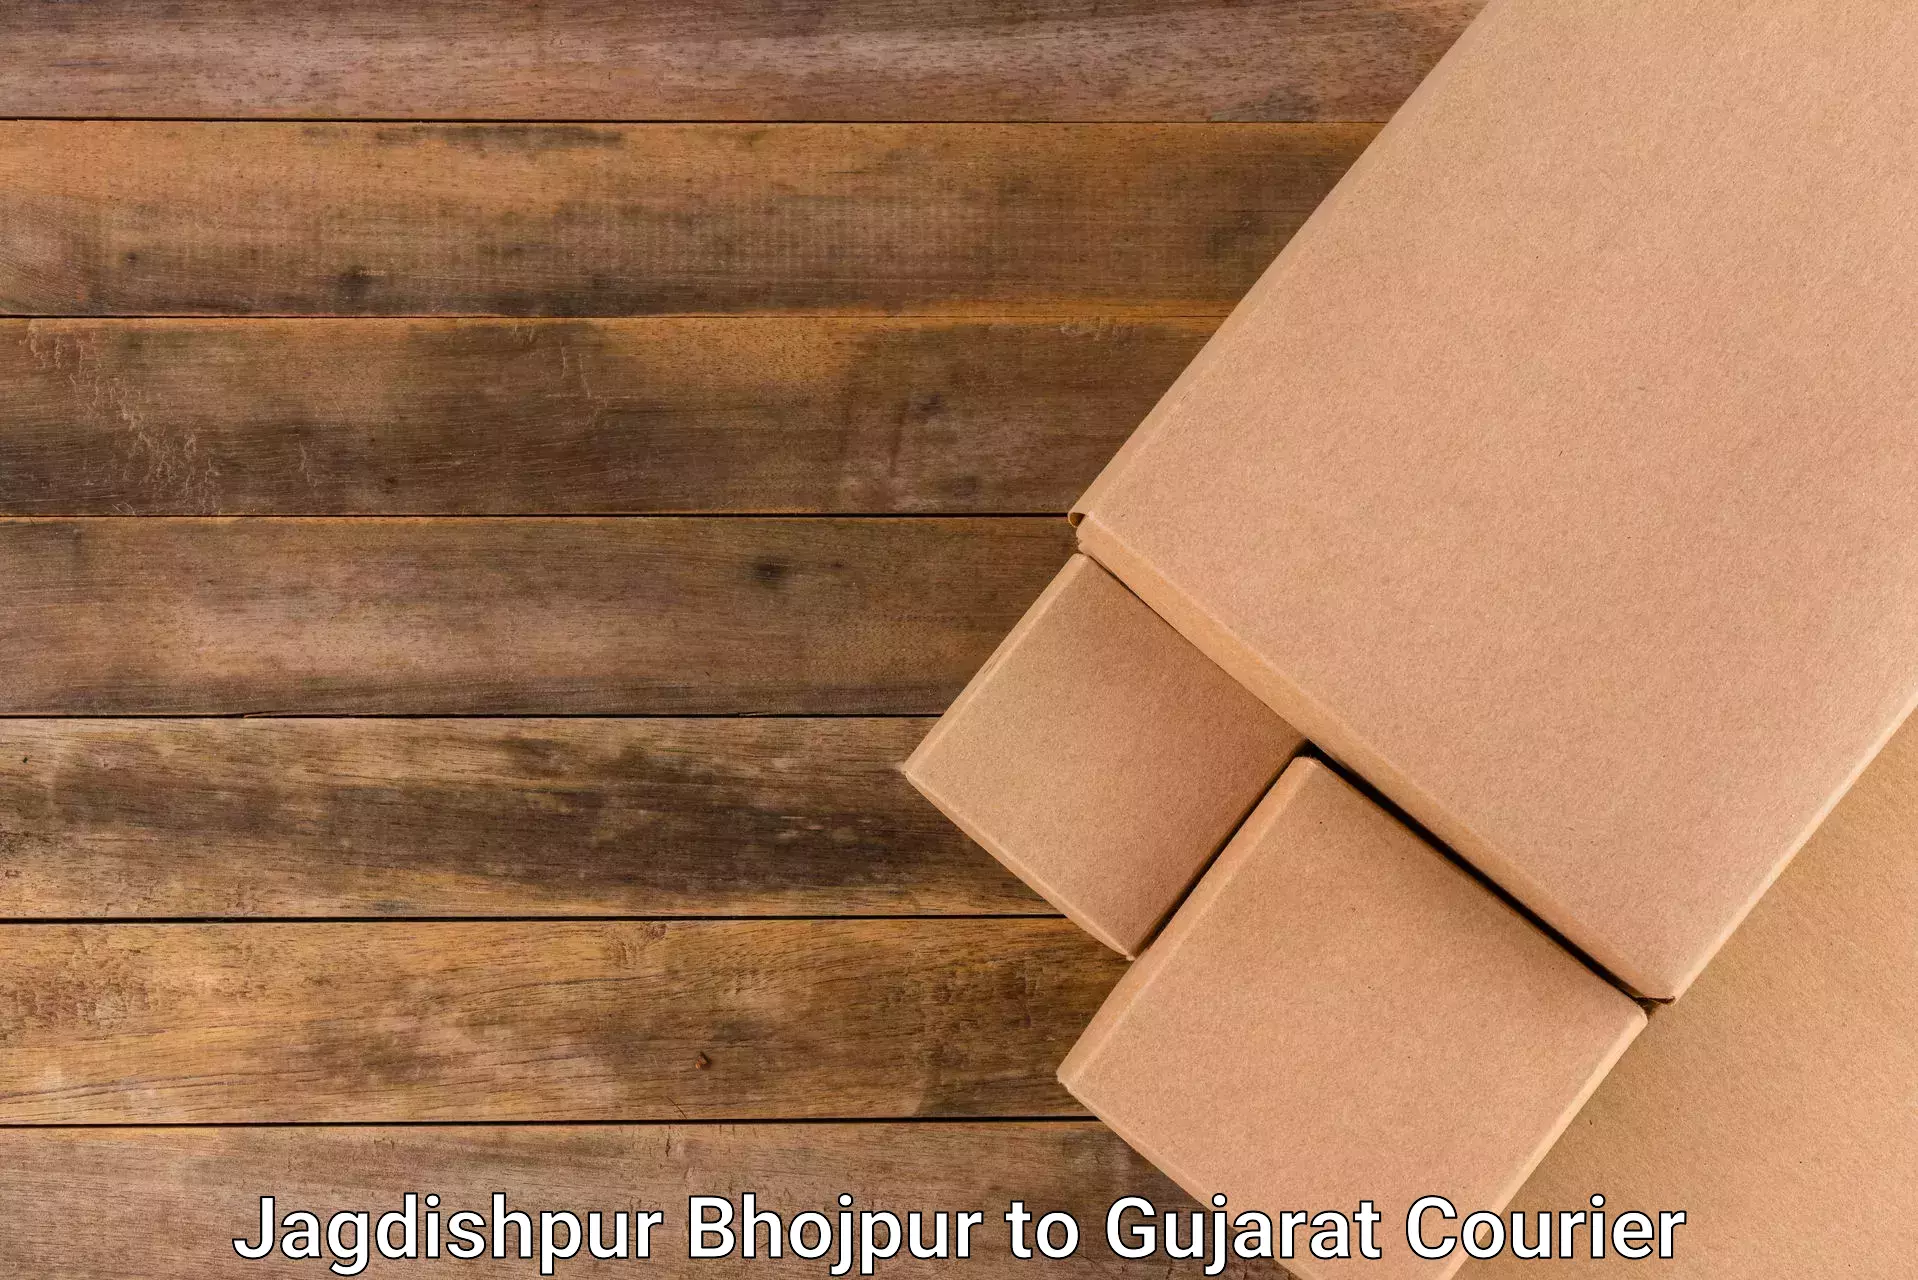 Next-day freight services in Jagdishpur Bhojpur to Shihori